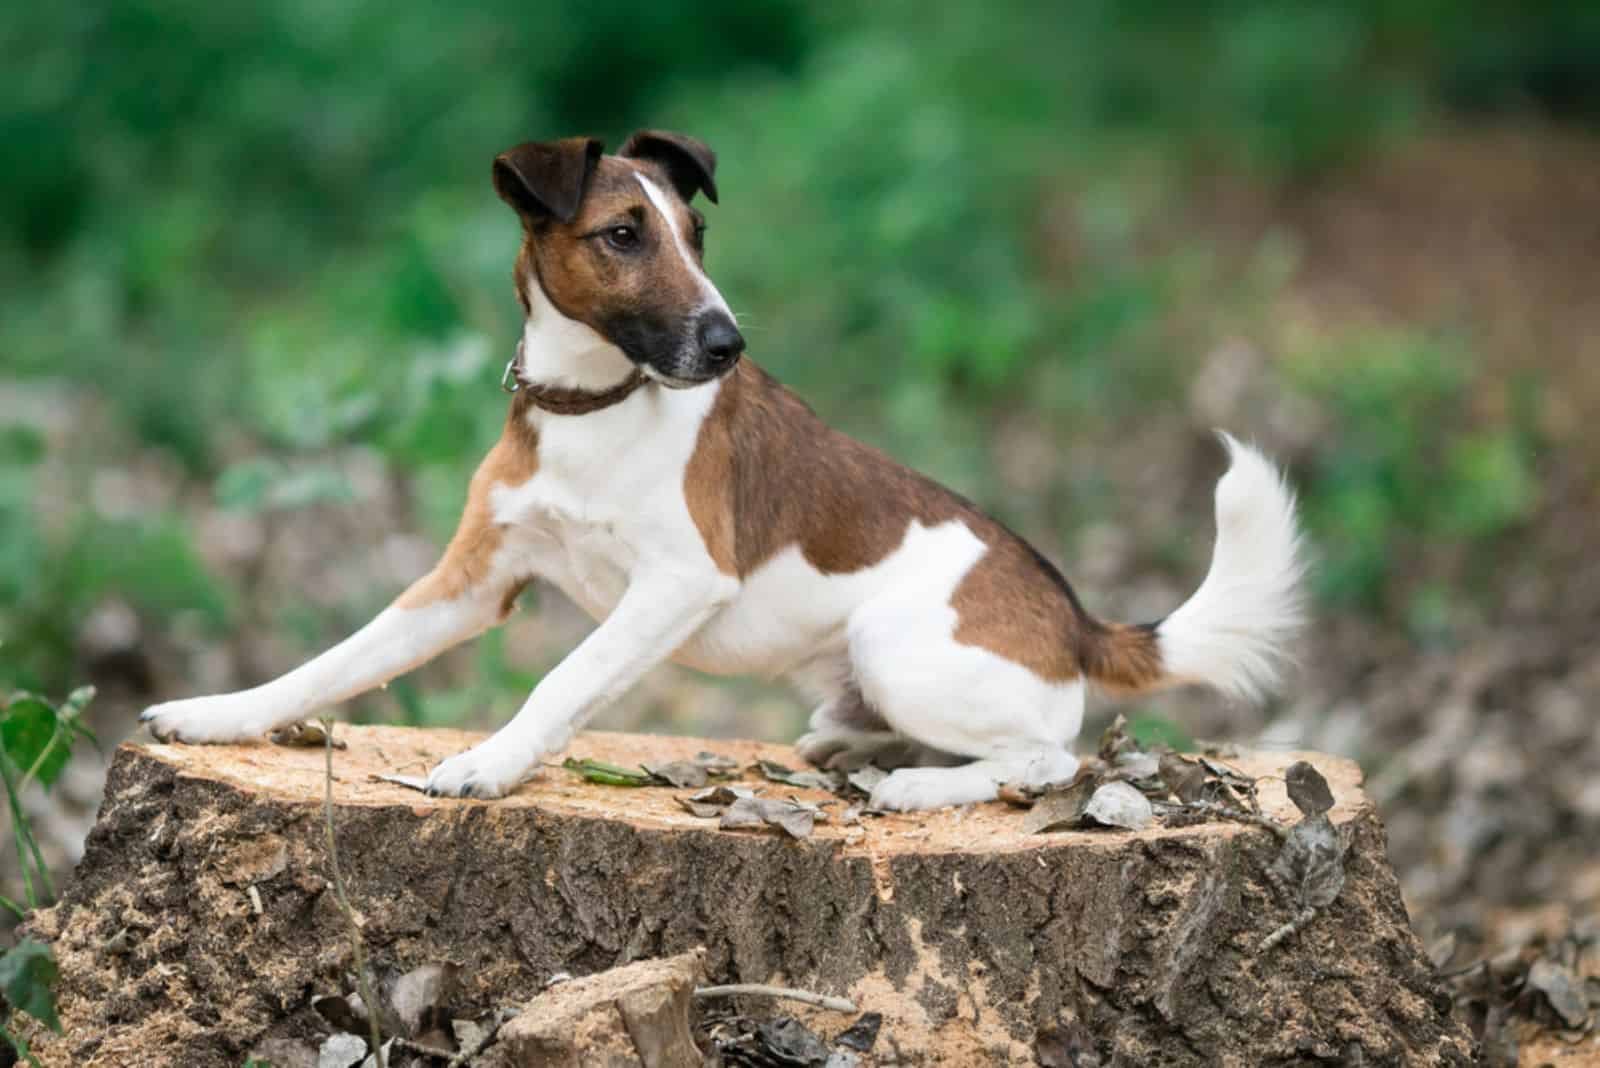  The Smooth Fox Terrier